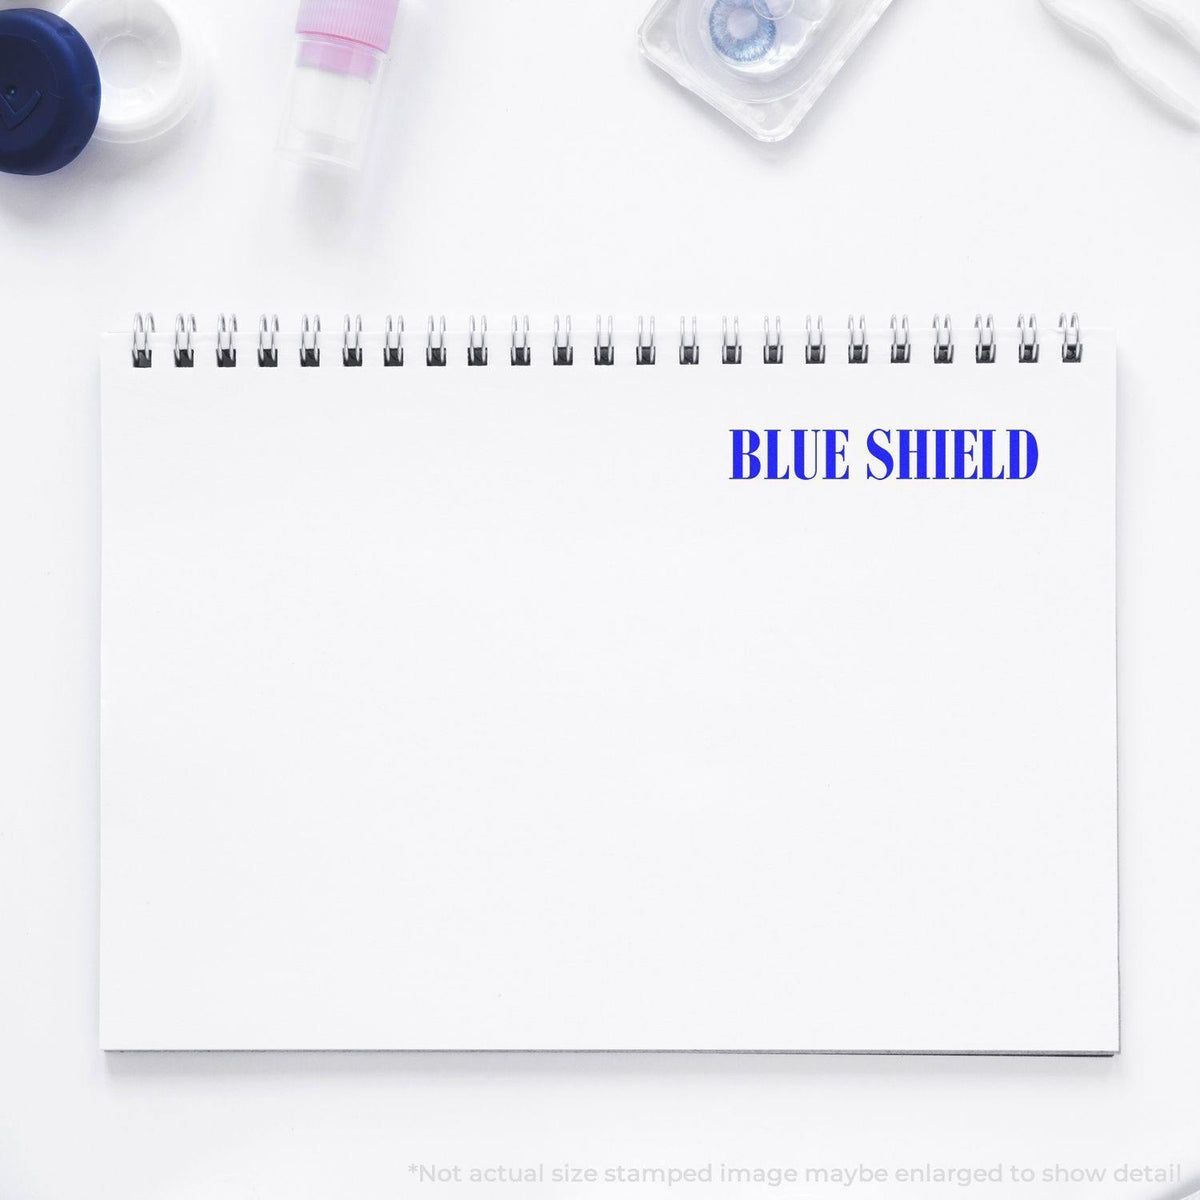 Large Self Inking Blue Shield Stamp In Use Photo